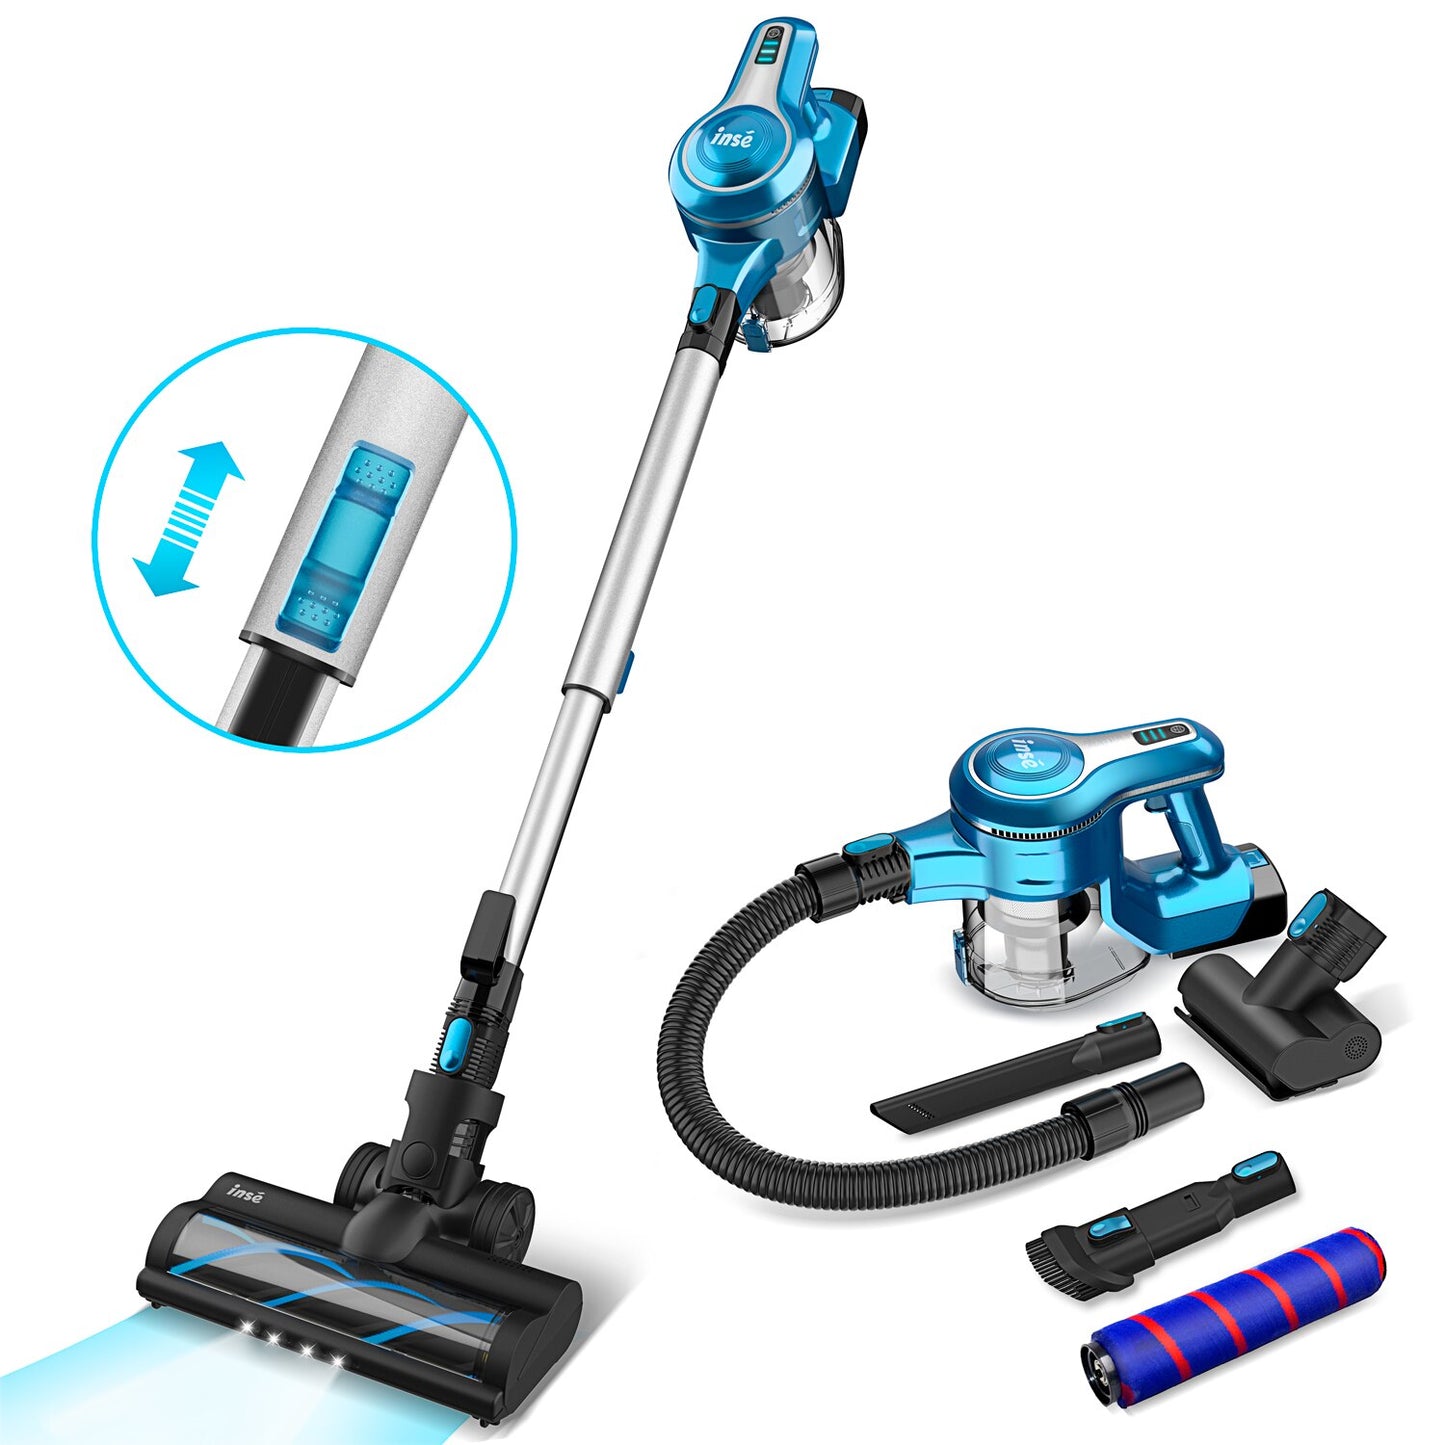 INSE Cordless Vacuum Cleaner Up to 45min Runtime, Rechargeable Battery Vacuum, Lightweight Vacuum for Carpet Hard Floor Pet Hair